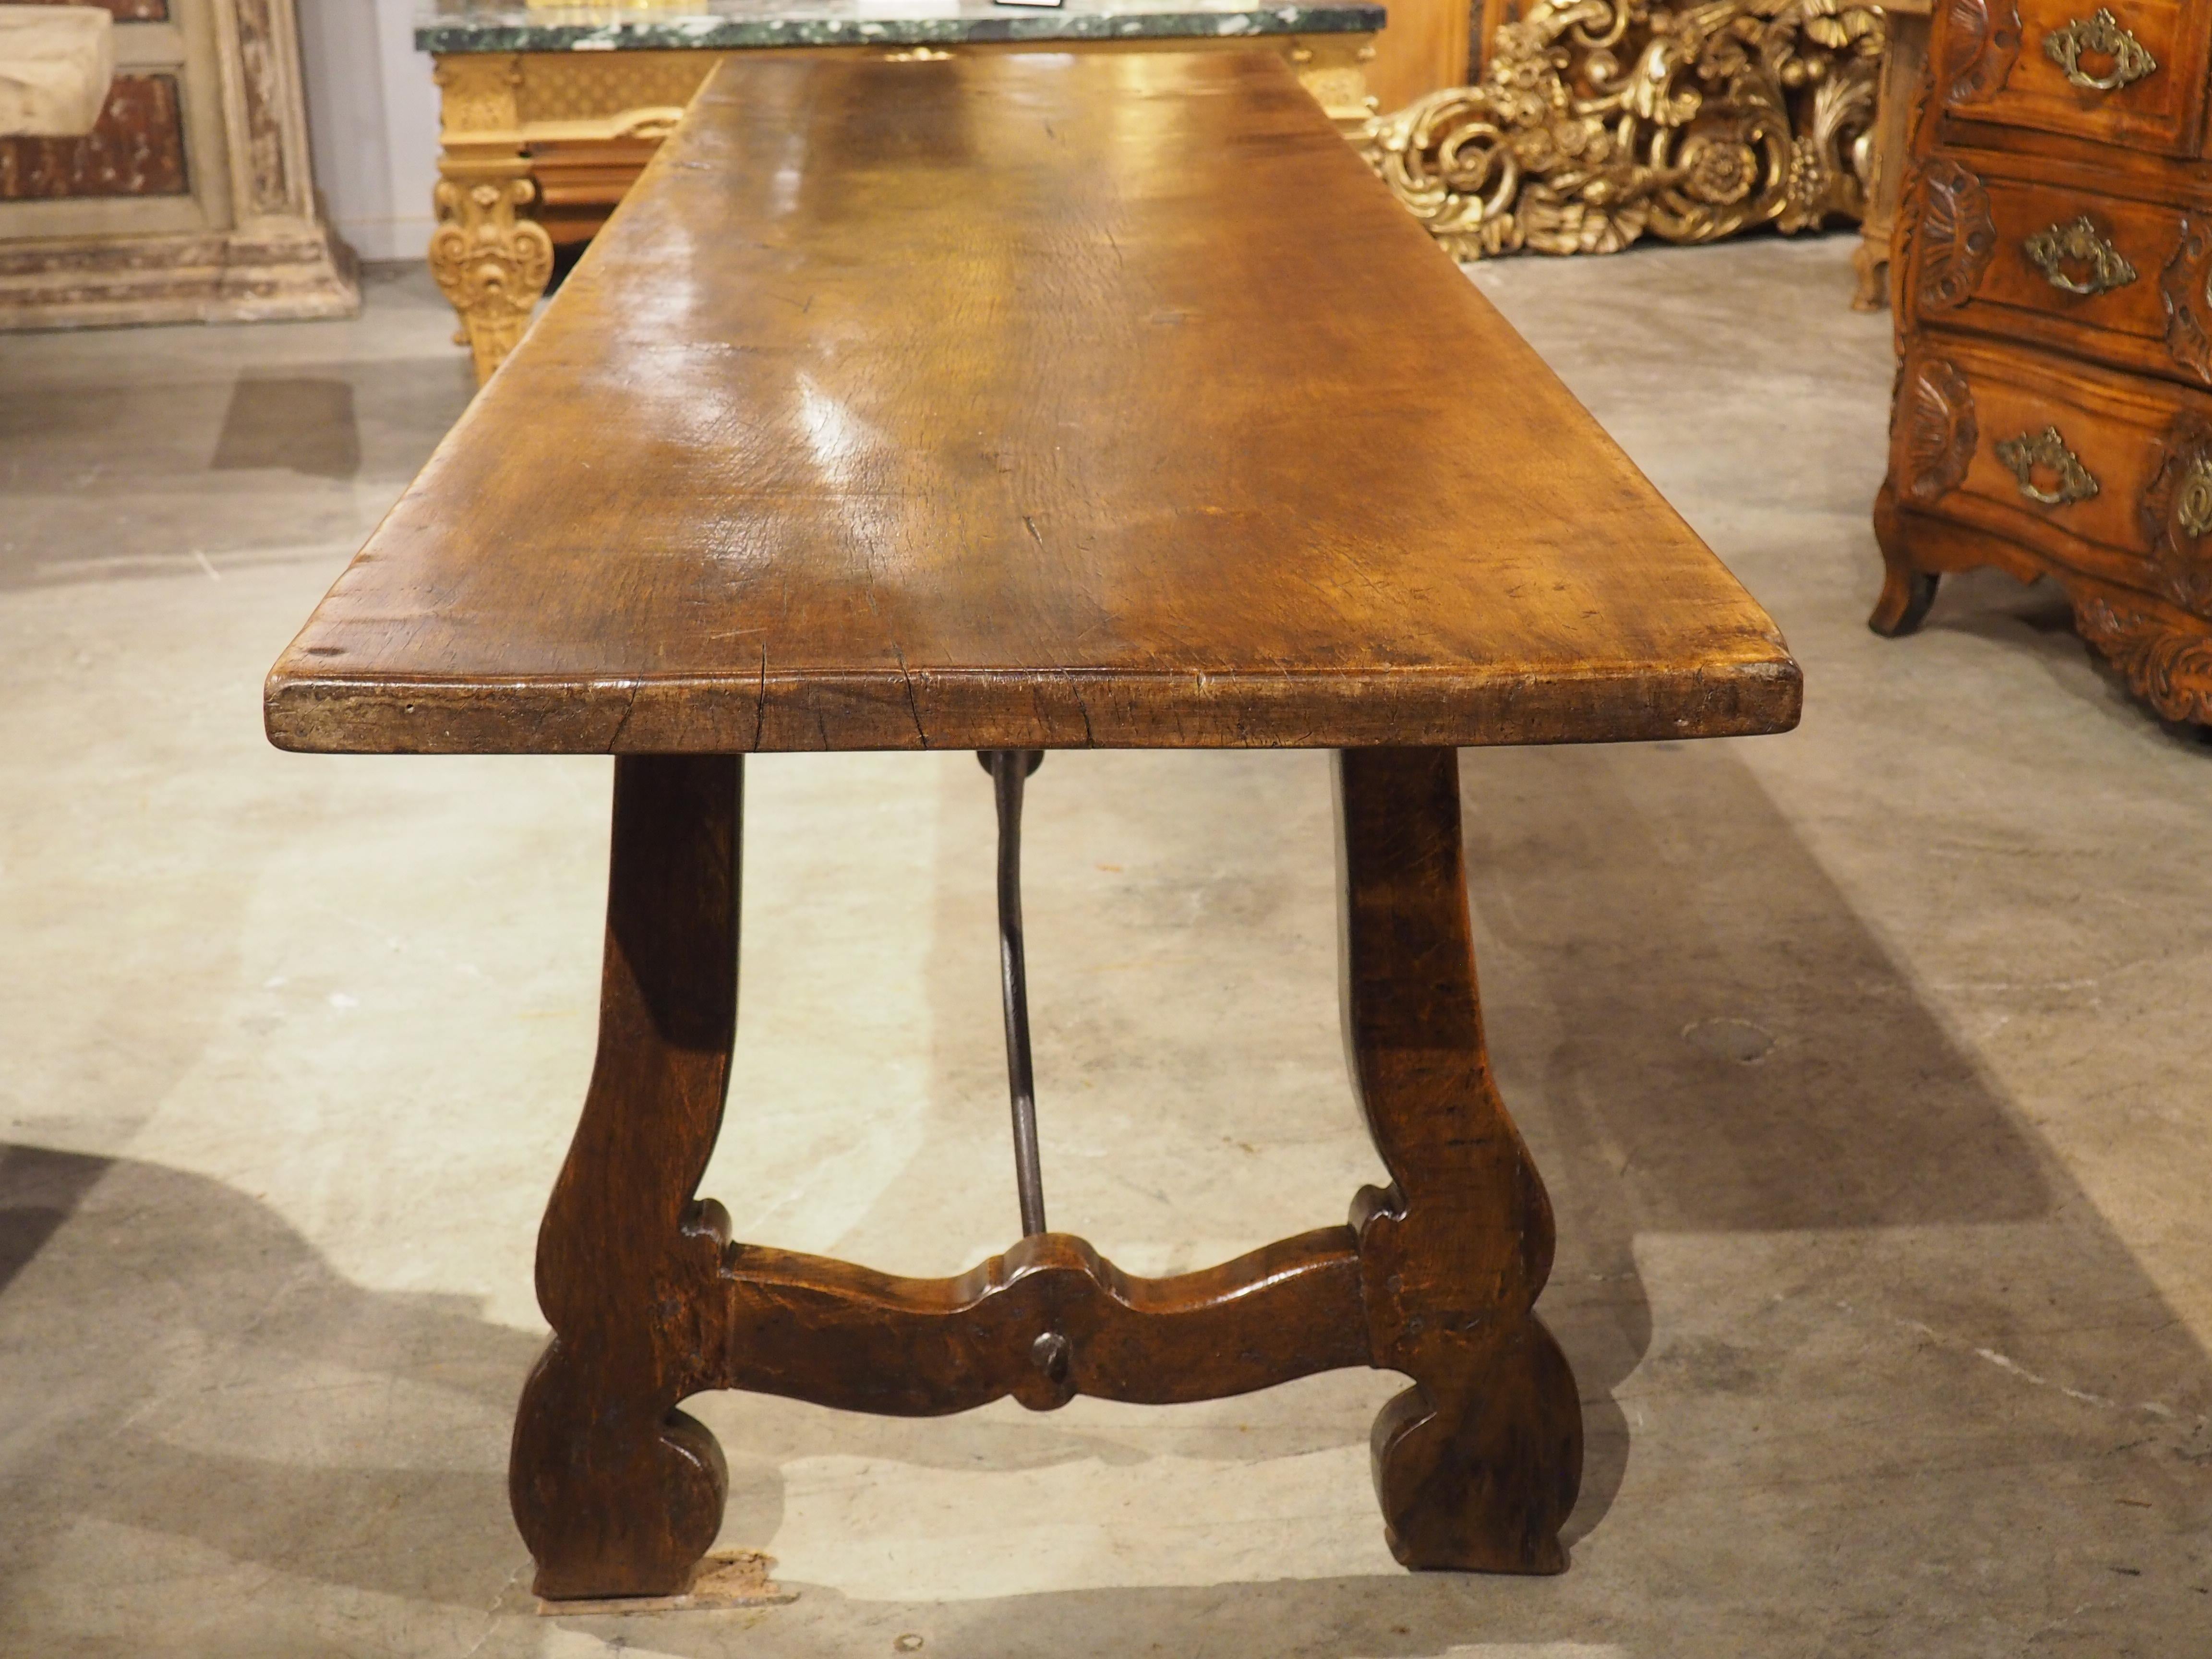 An Elegant 18th Century Single Walnut Plank Top Dining Table from Spain For Sale 9